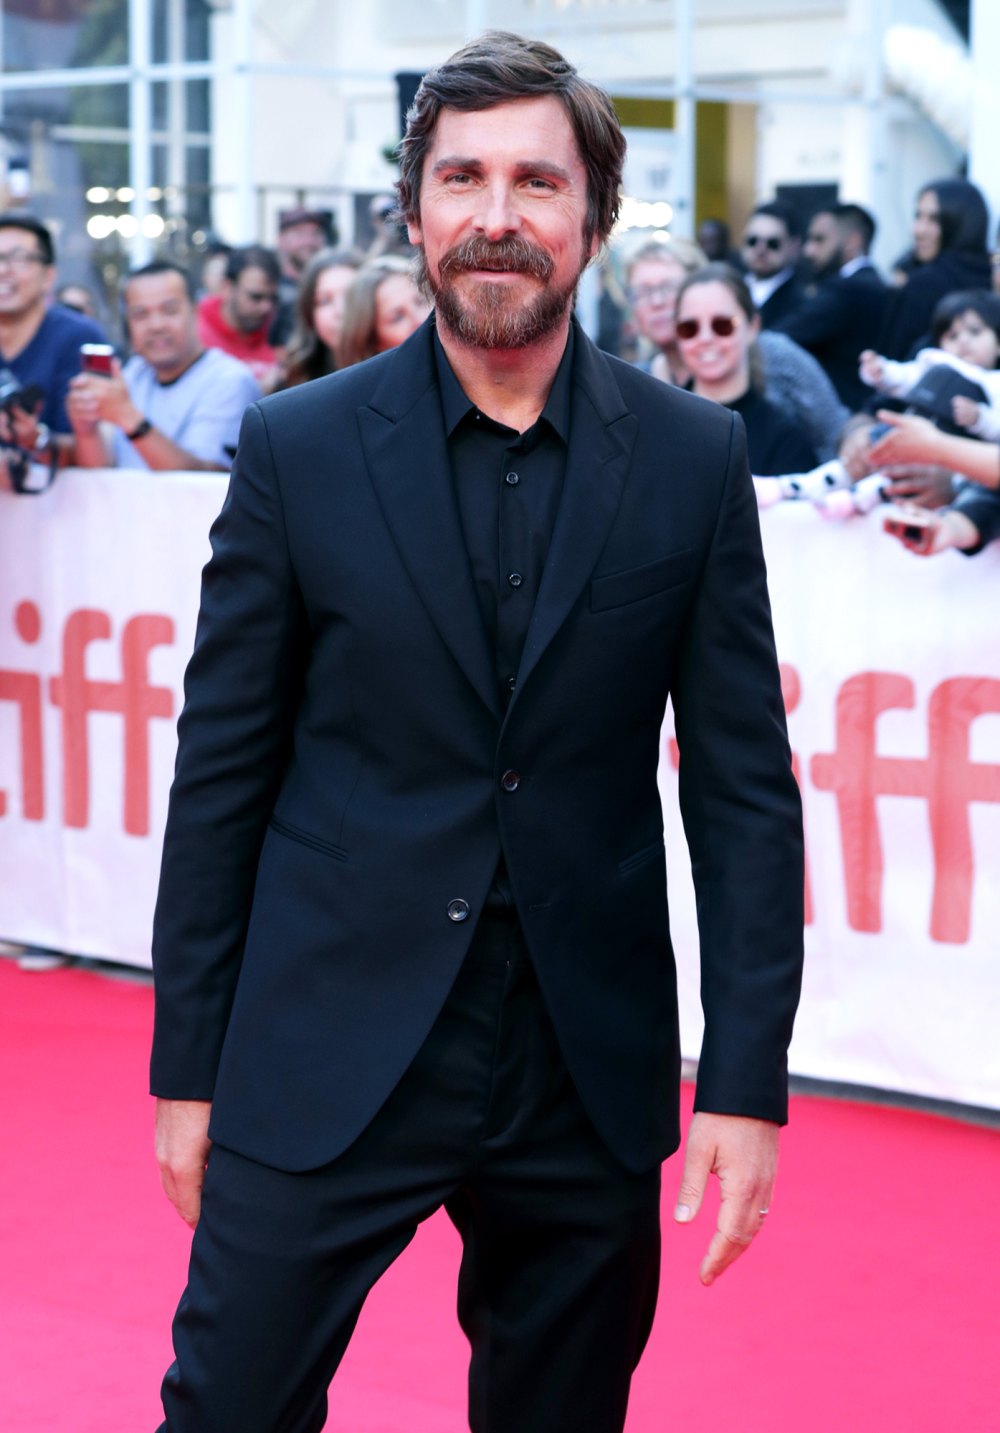 Christian Bale Is ‘Done’ With Dramatic Movie Weight Loss